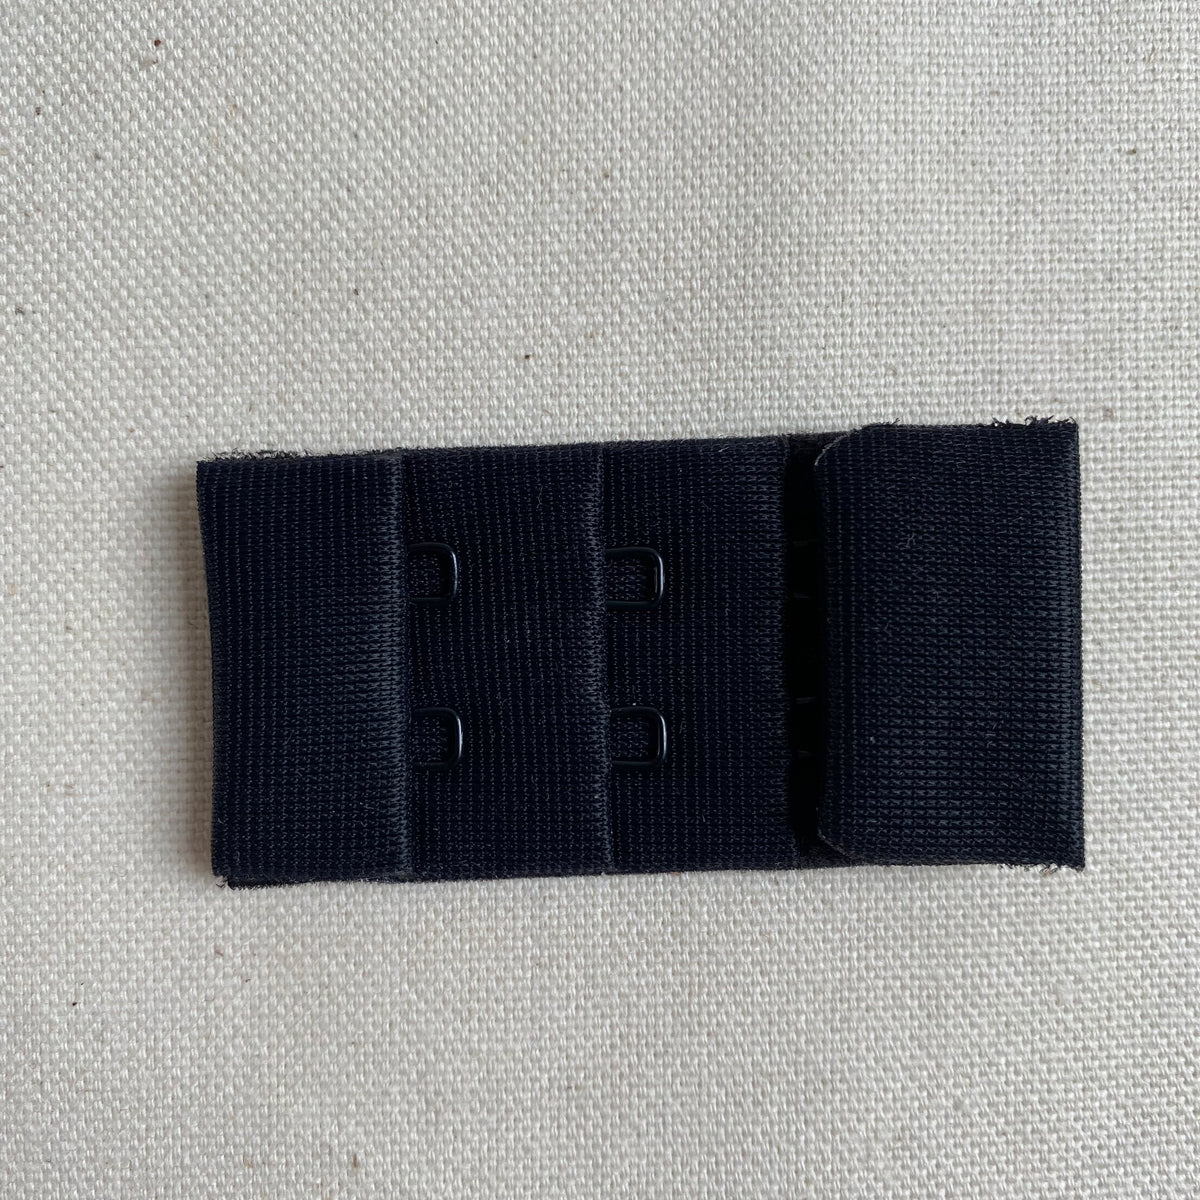 Black Bra Making Replacement Hook and Eye Tape Closures 2 Rows 1 1/2 Wide  Lingerie Design, DIY Bra Supplies HE132 